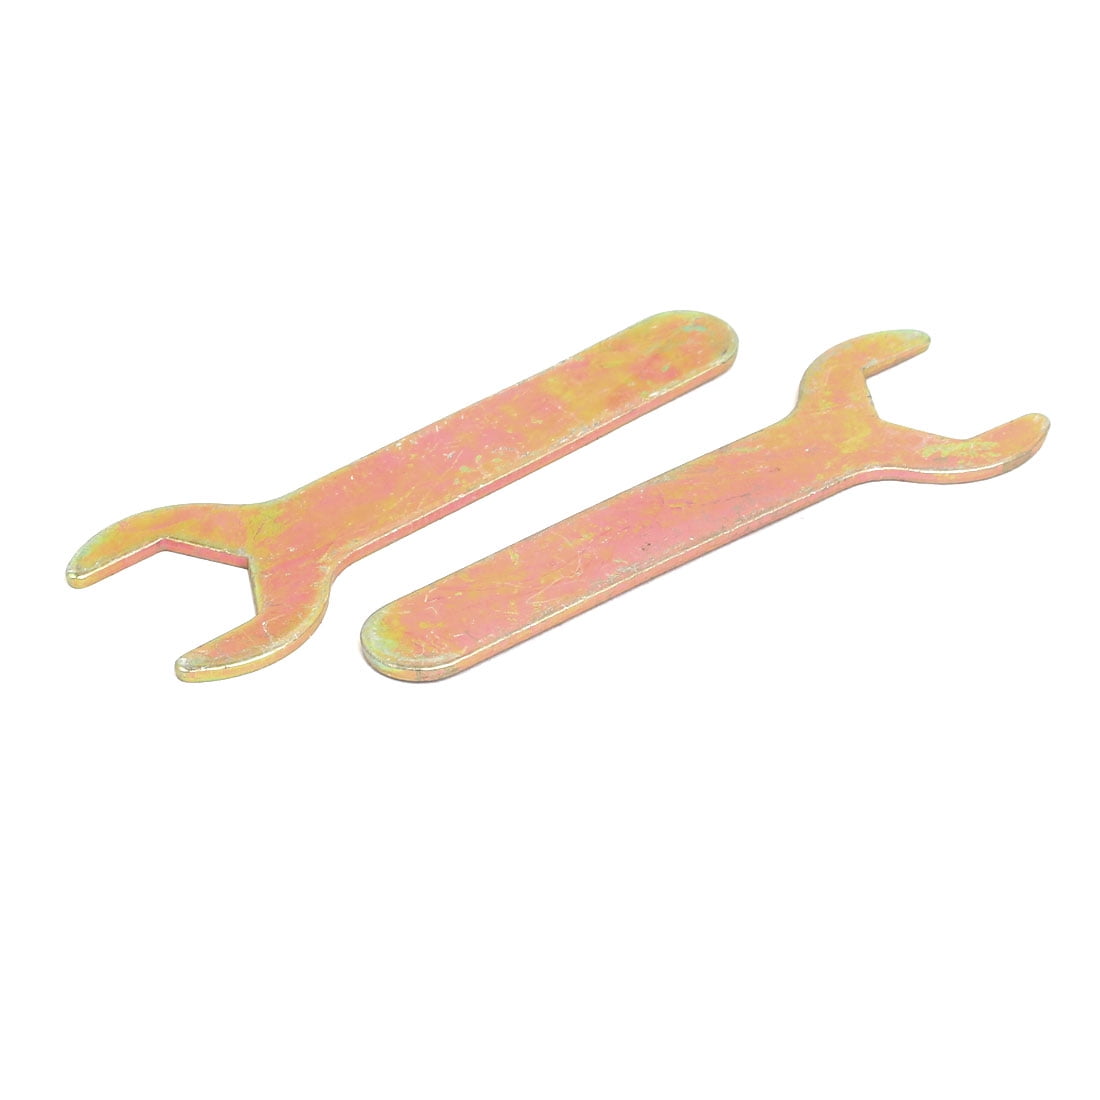 5pcs 17mm Single Ended U-Shaped Open End Wrench Spanner Repair Tool Bronze Tone 